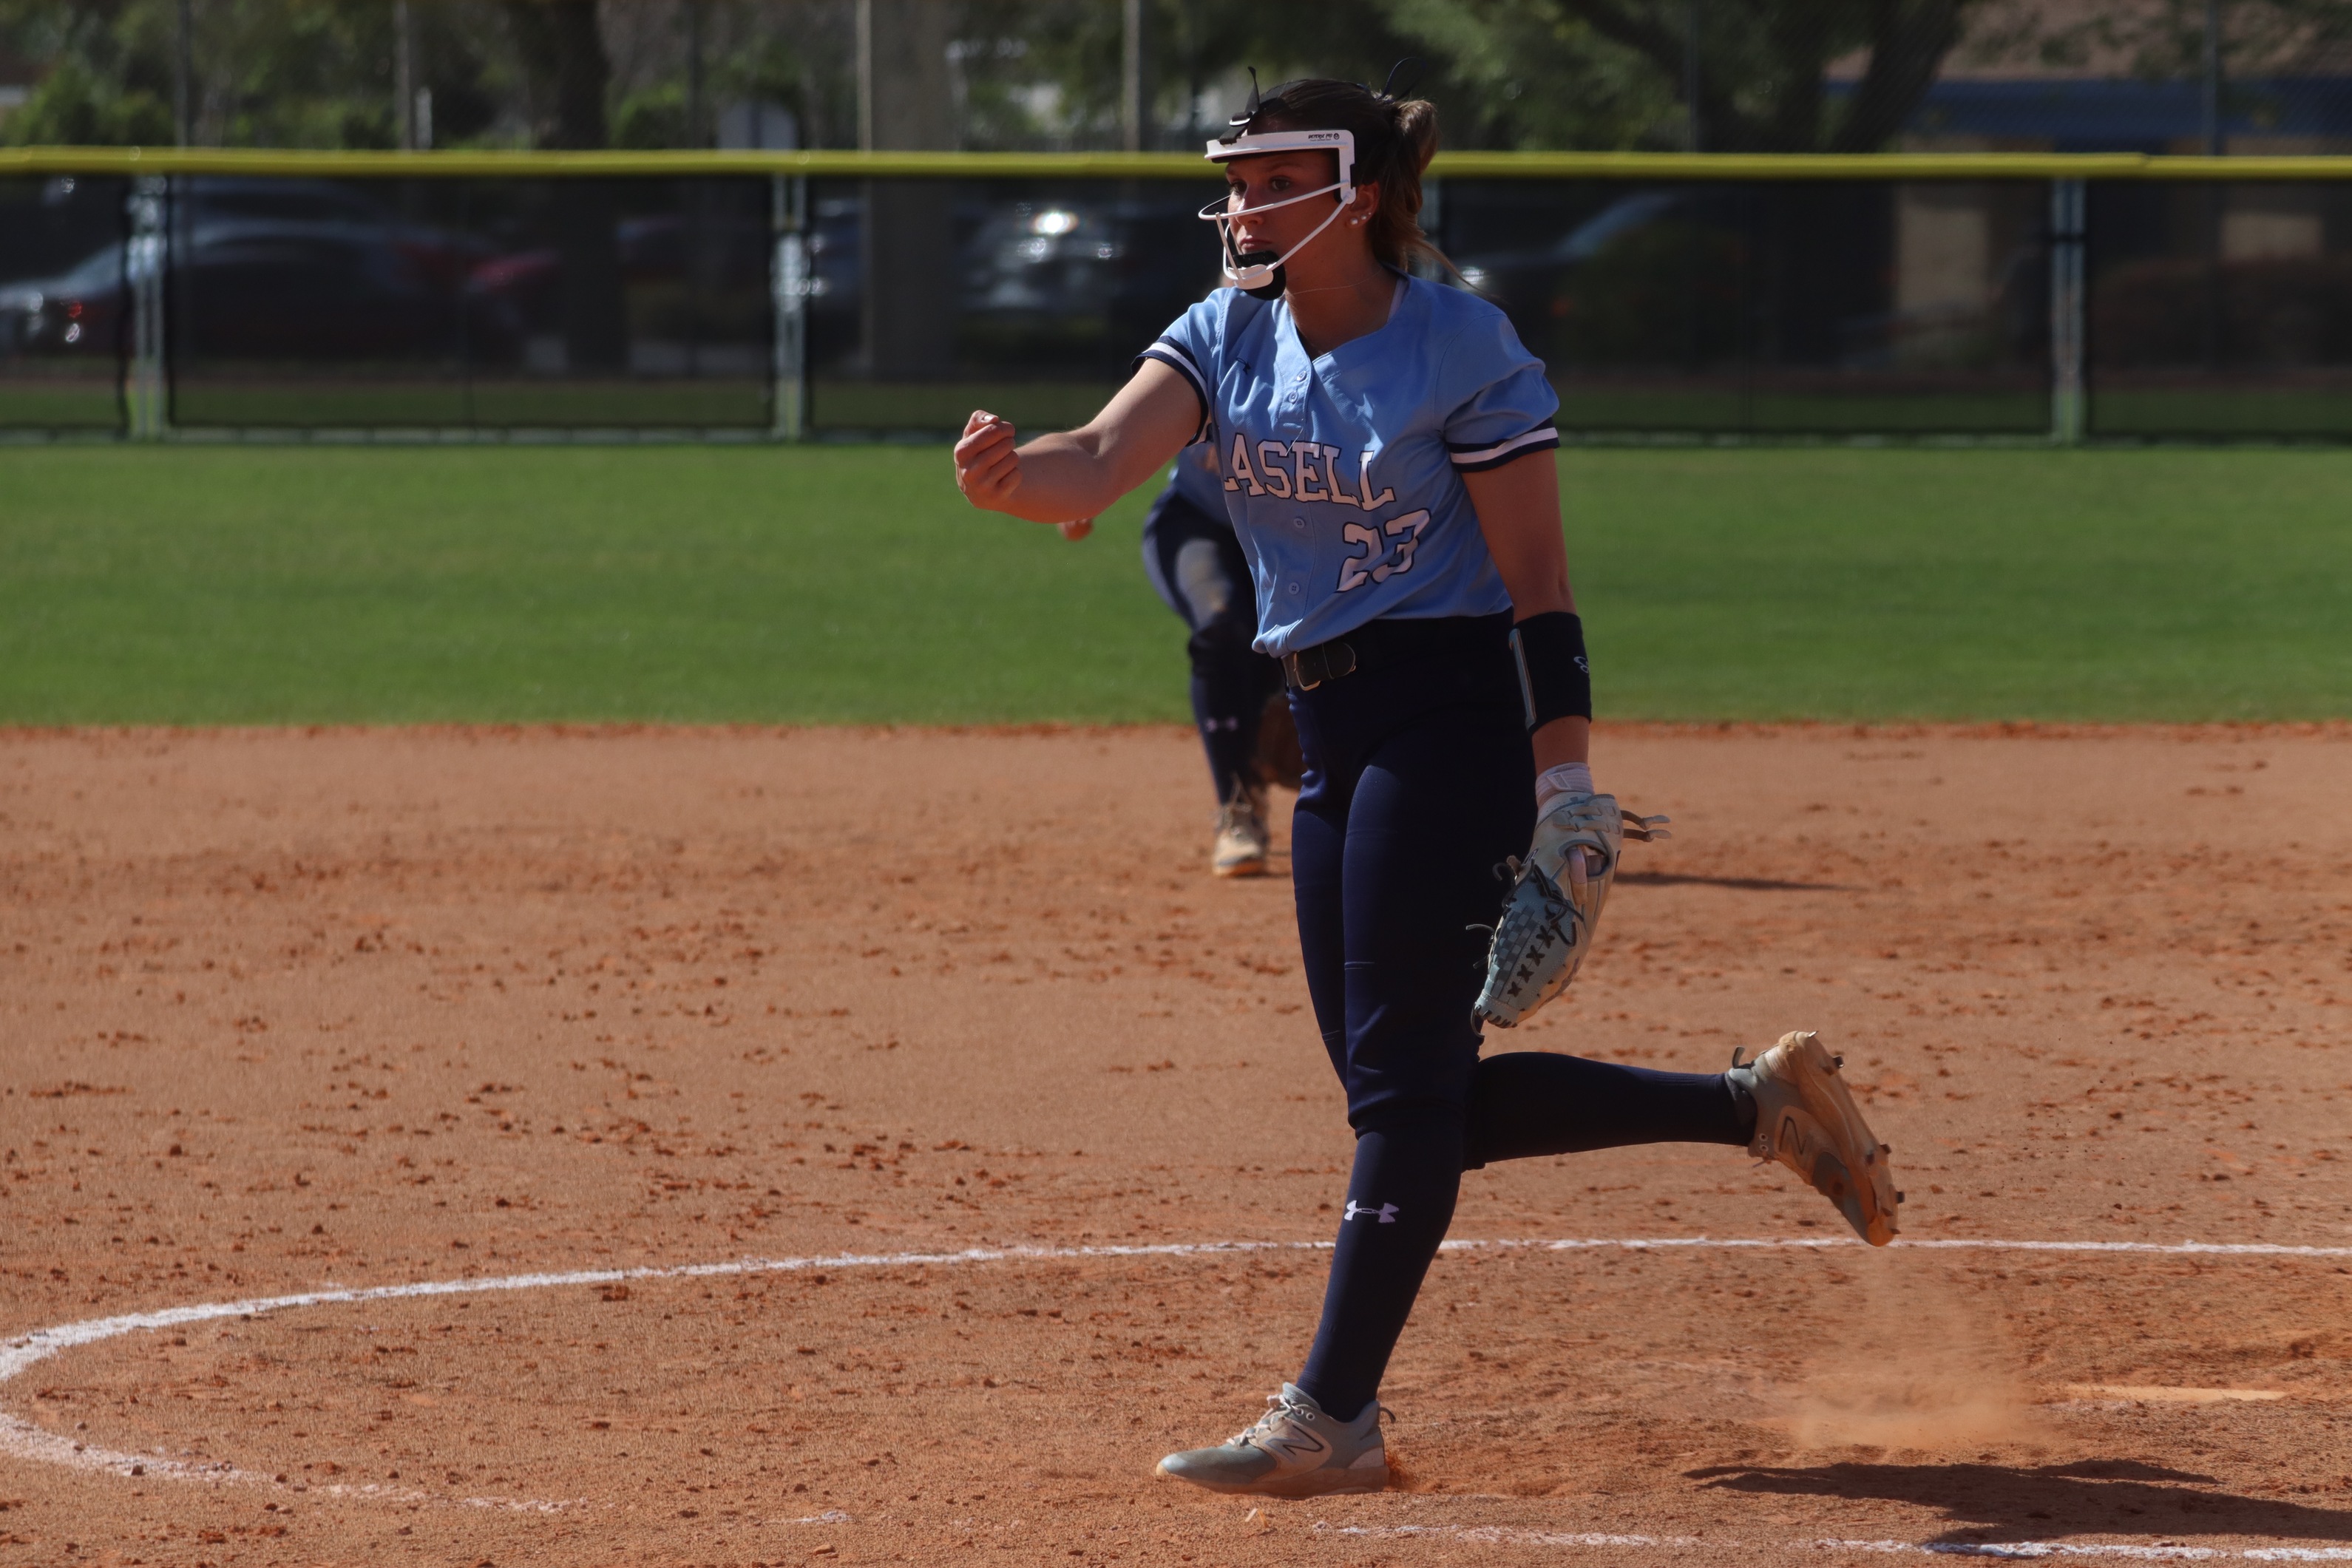 SB: Lasers Defeat UMass Dartmouth During First Half of the Spring Games